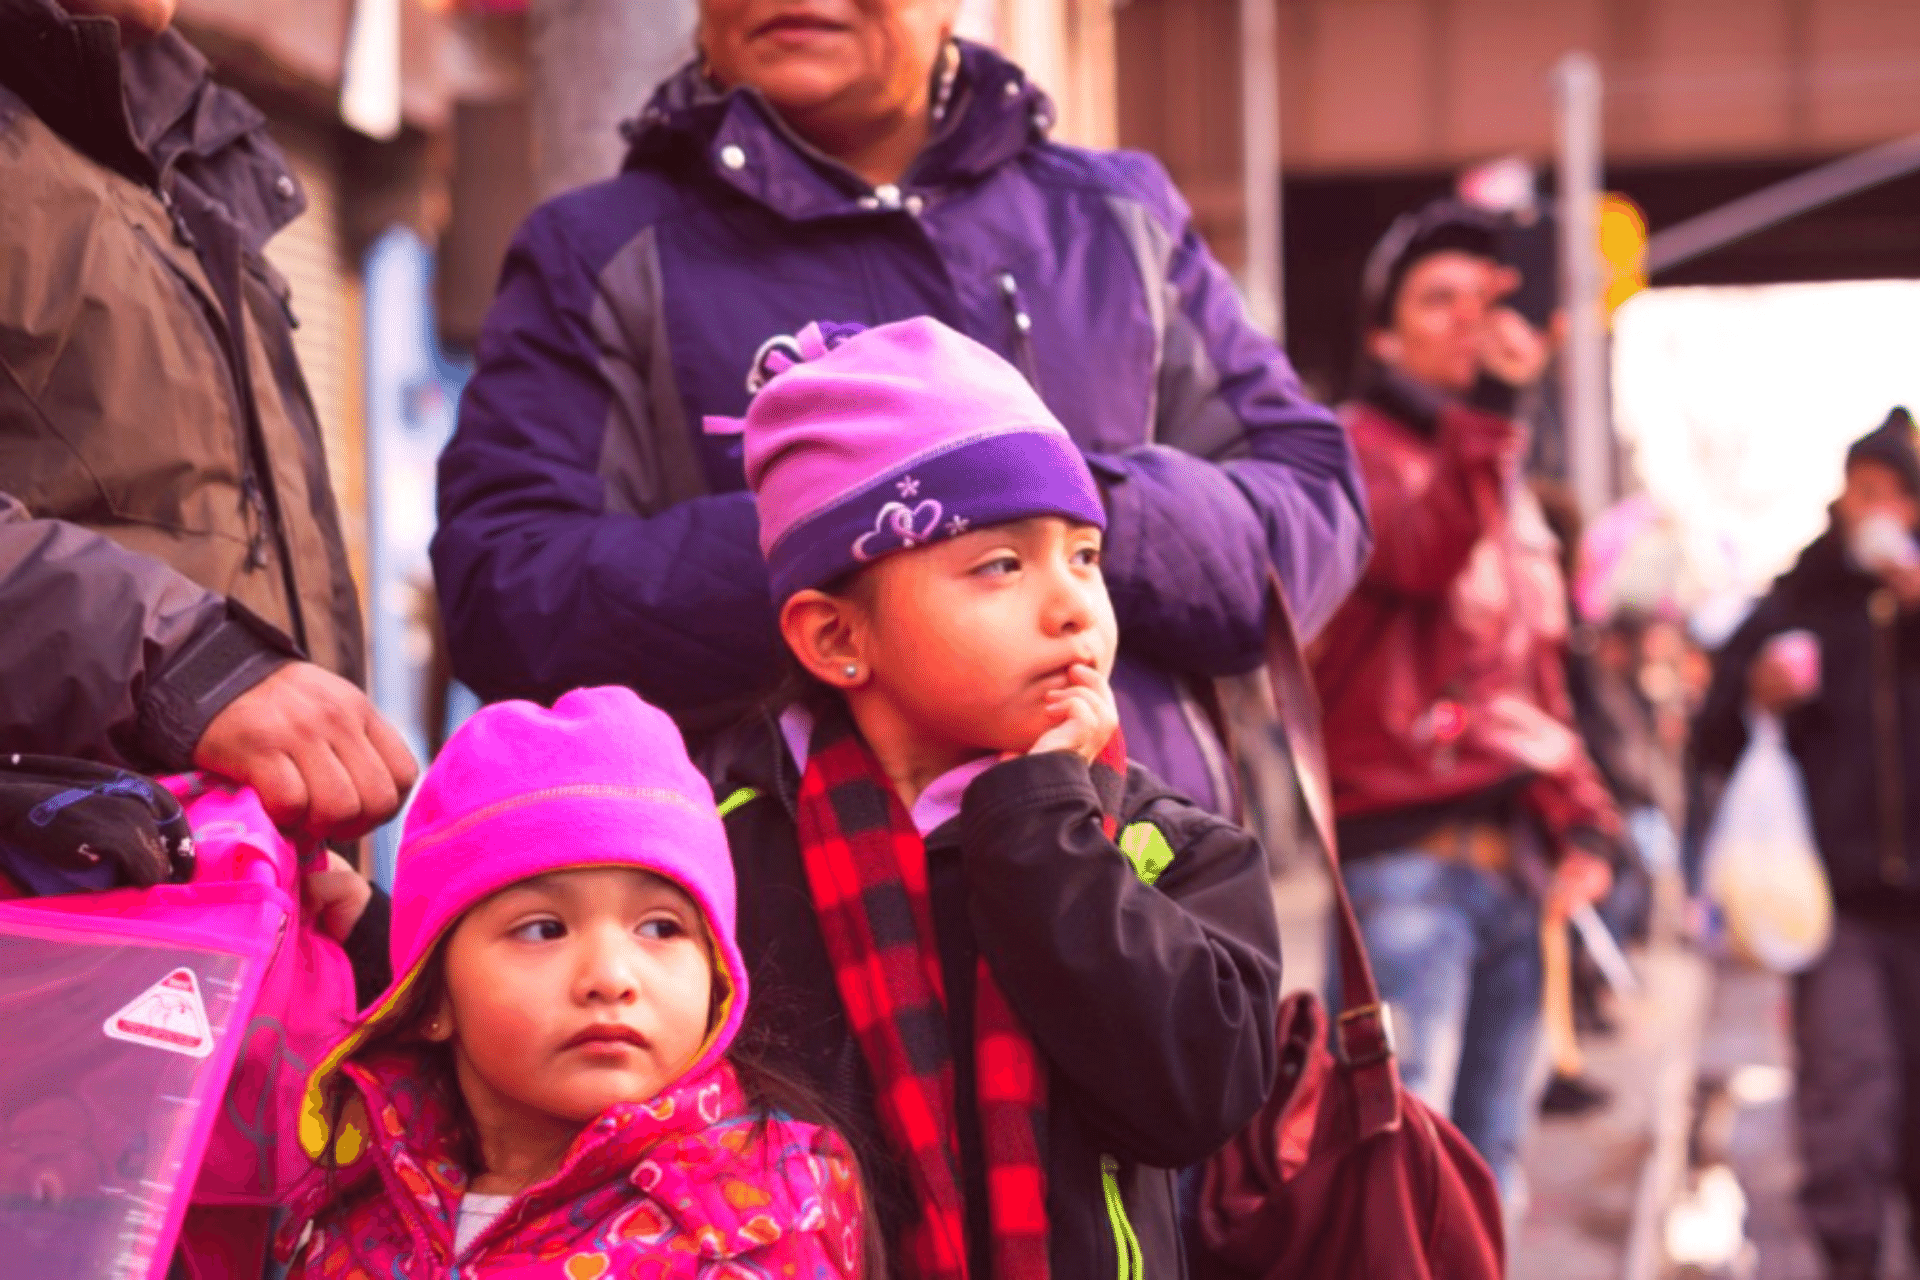 Children outside with adults in an urban setting wearing winter clothes